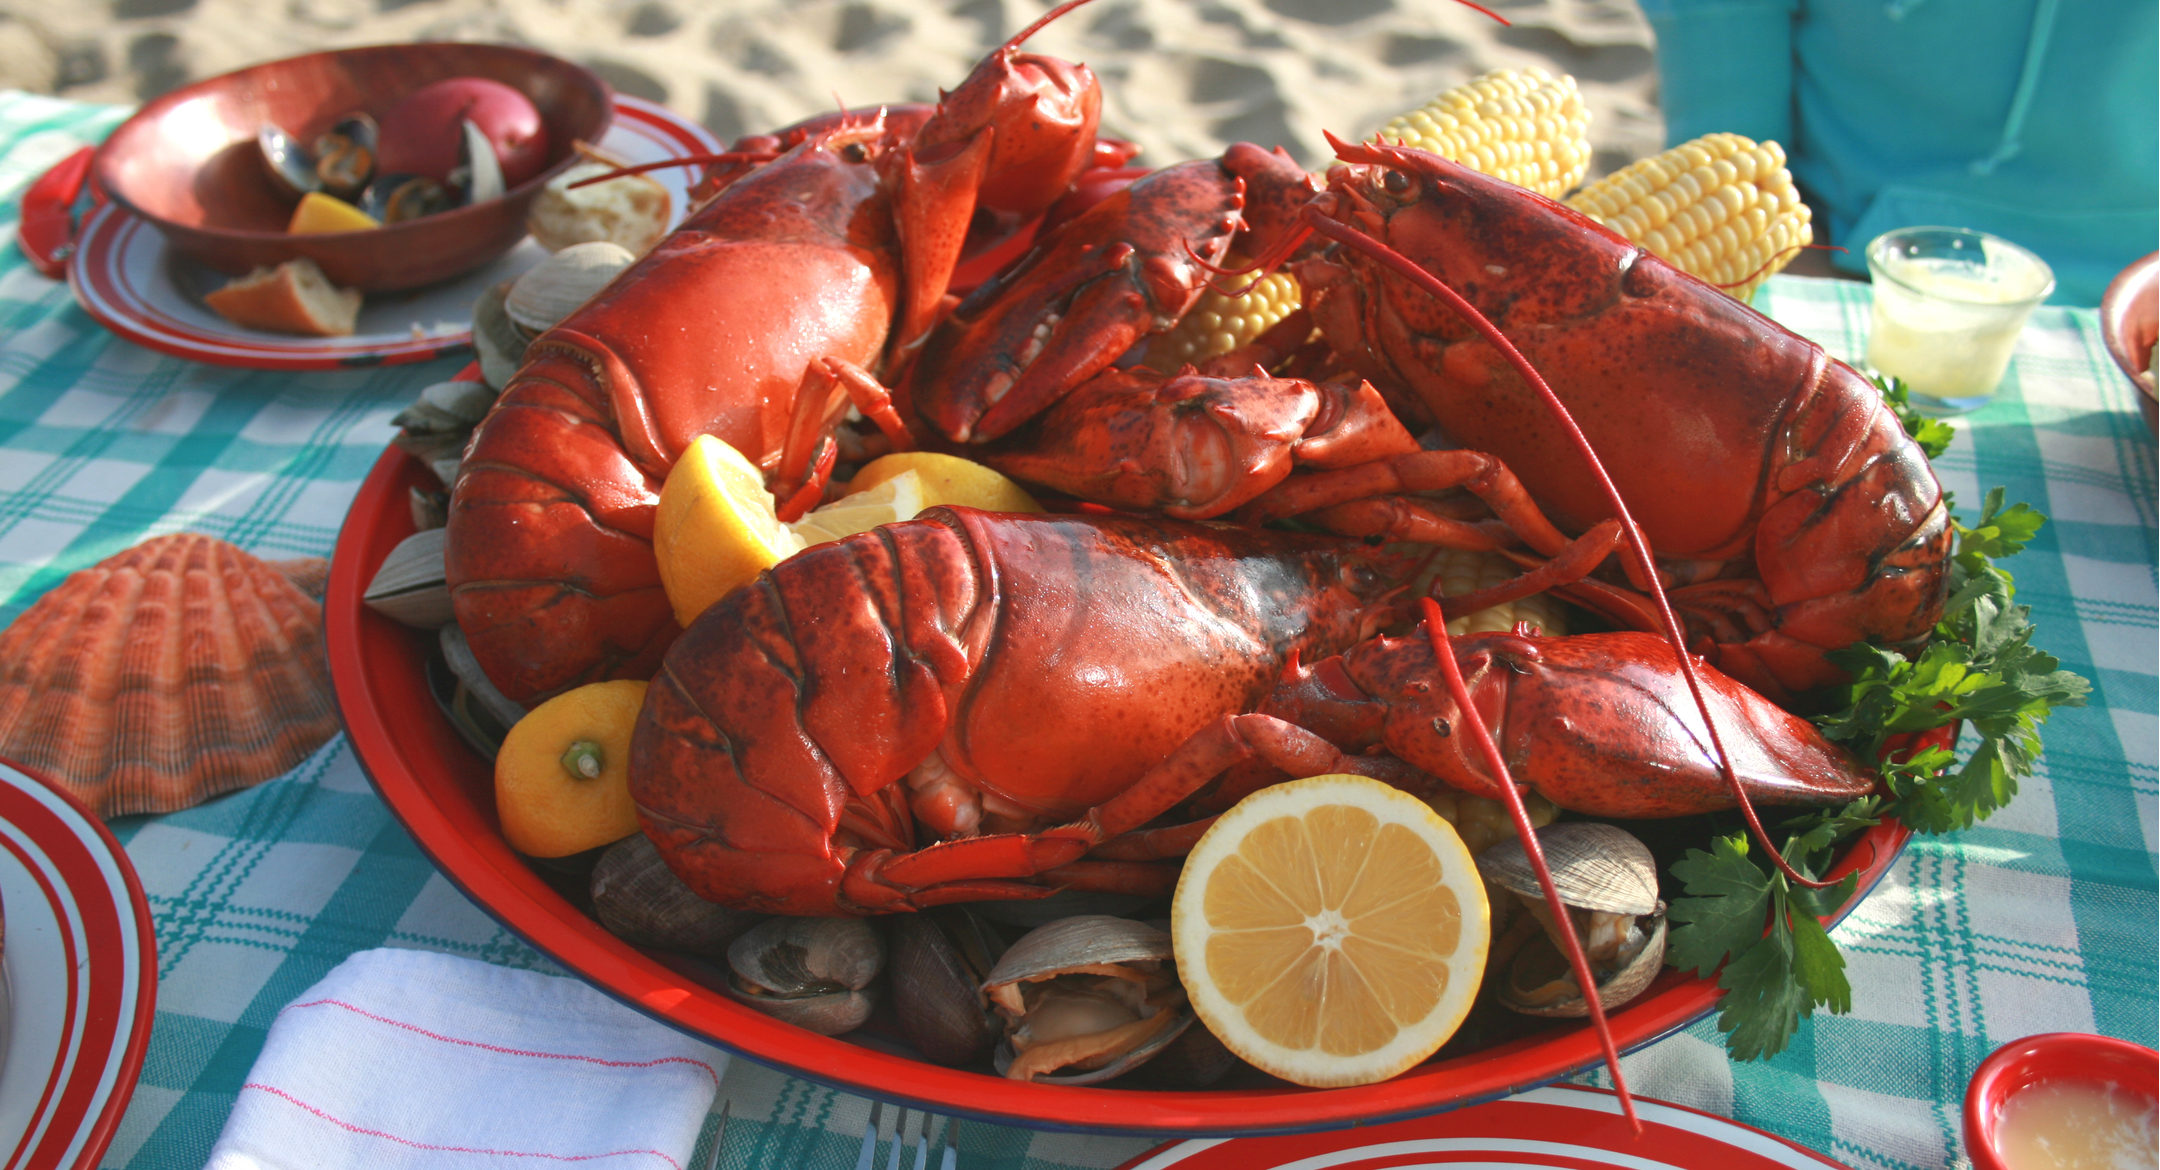 Newport Lobster of Rhode Island acquired by investment firm